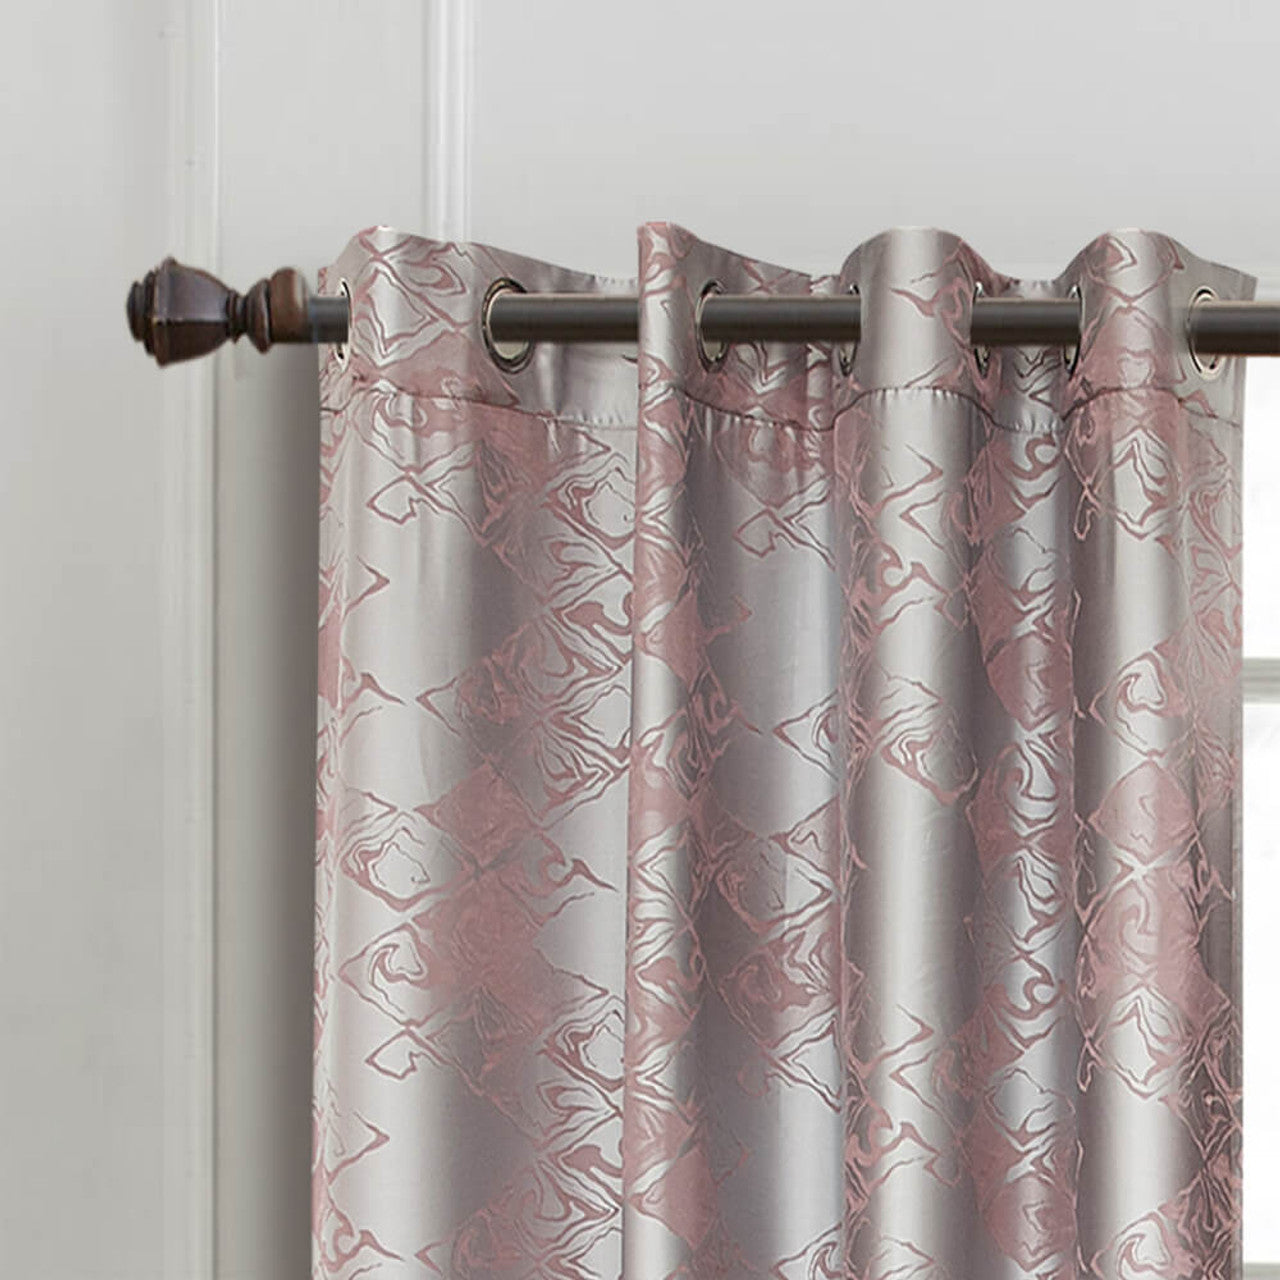 Curtains Semi-Blackout Drapes Hollywood by Dolce Mela